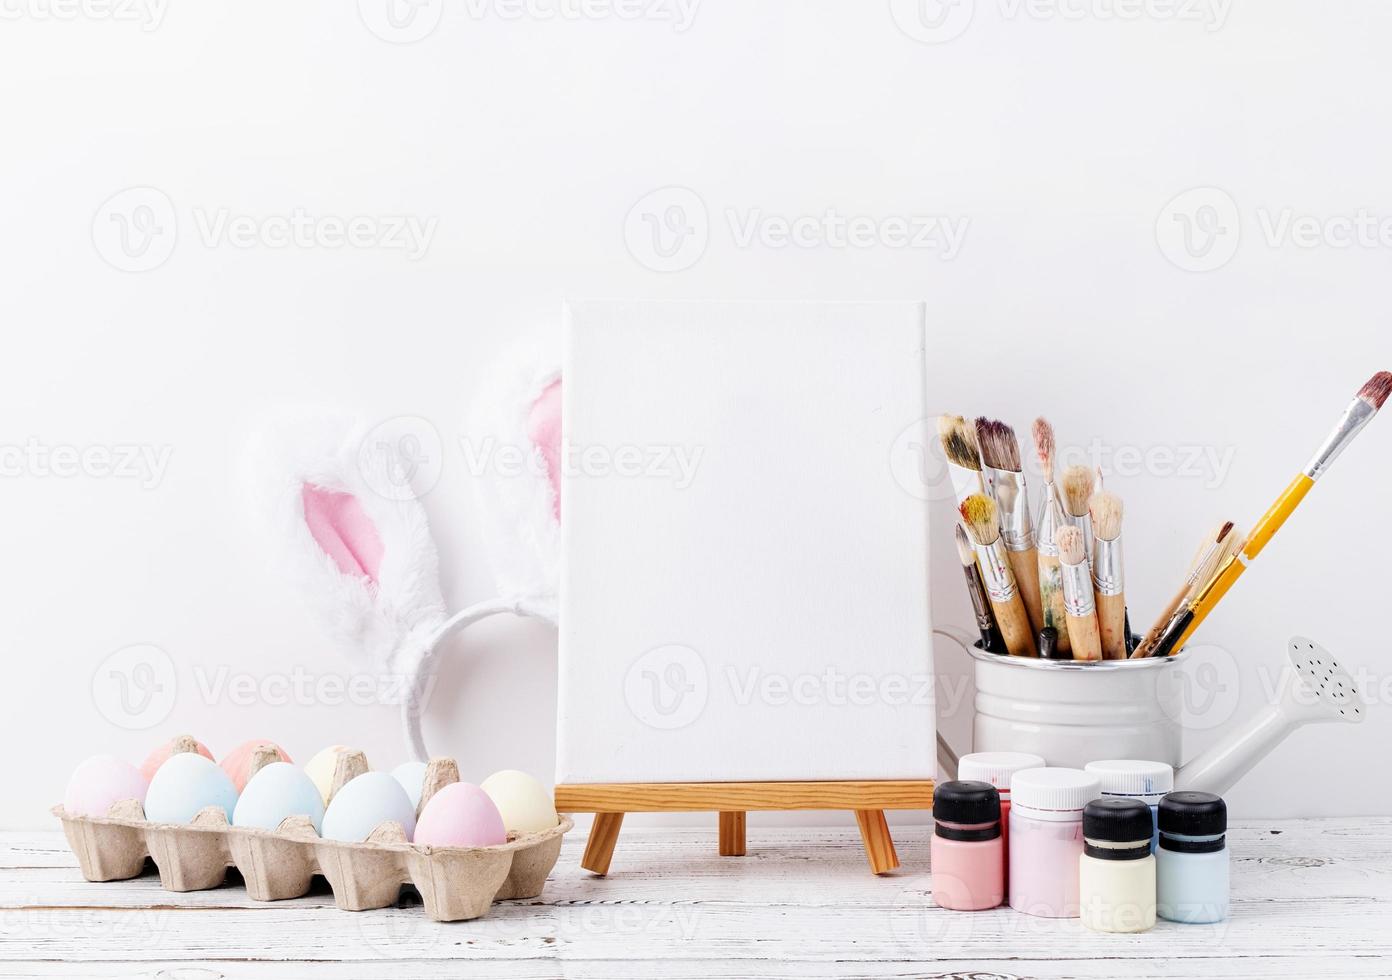 Pastel colored Easter eggs and mimosa flowers with blank white frame for mockup design, front view on white brick wall background photo